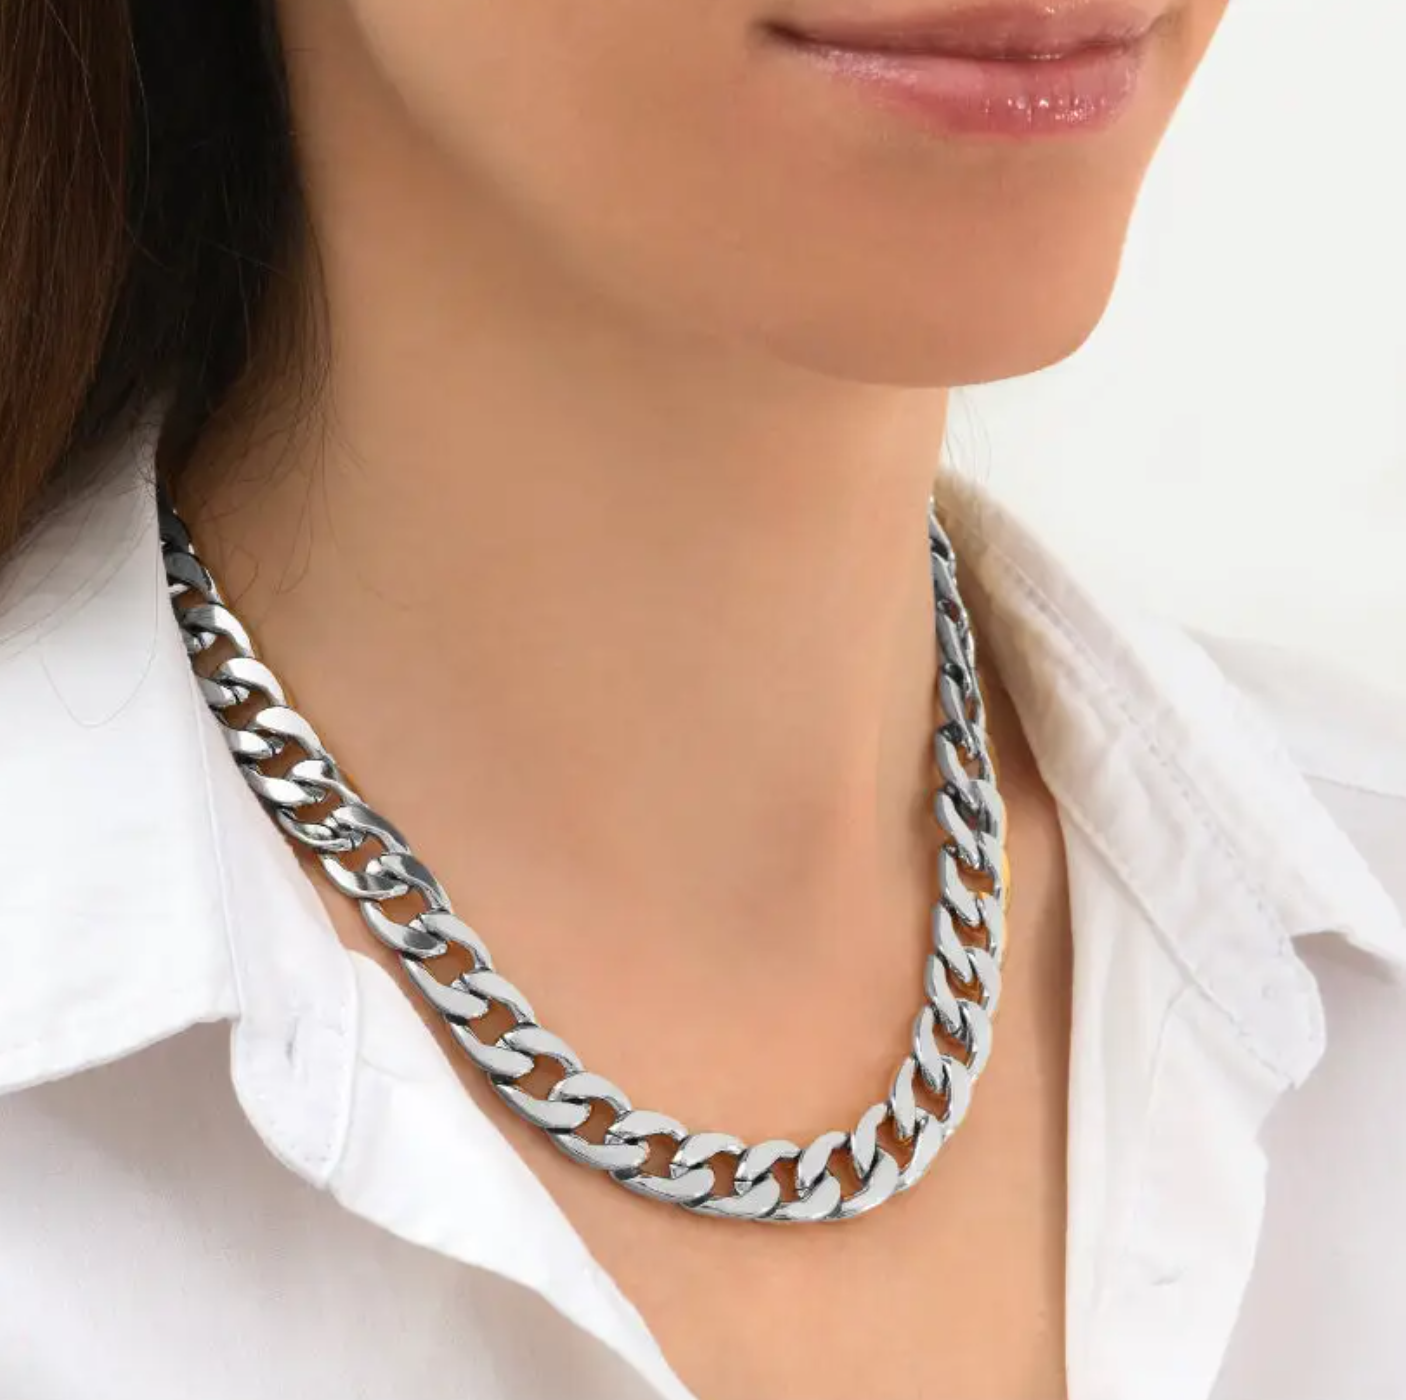 Chunky Silver Link Chain Necklace